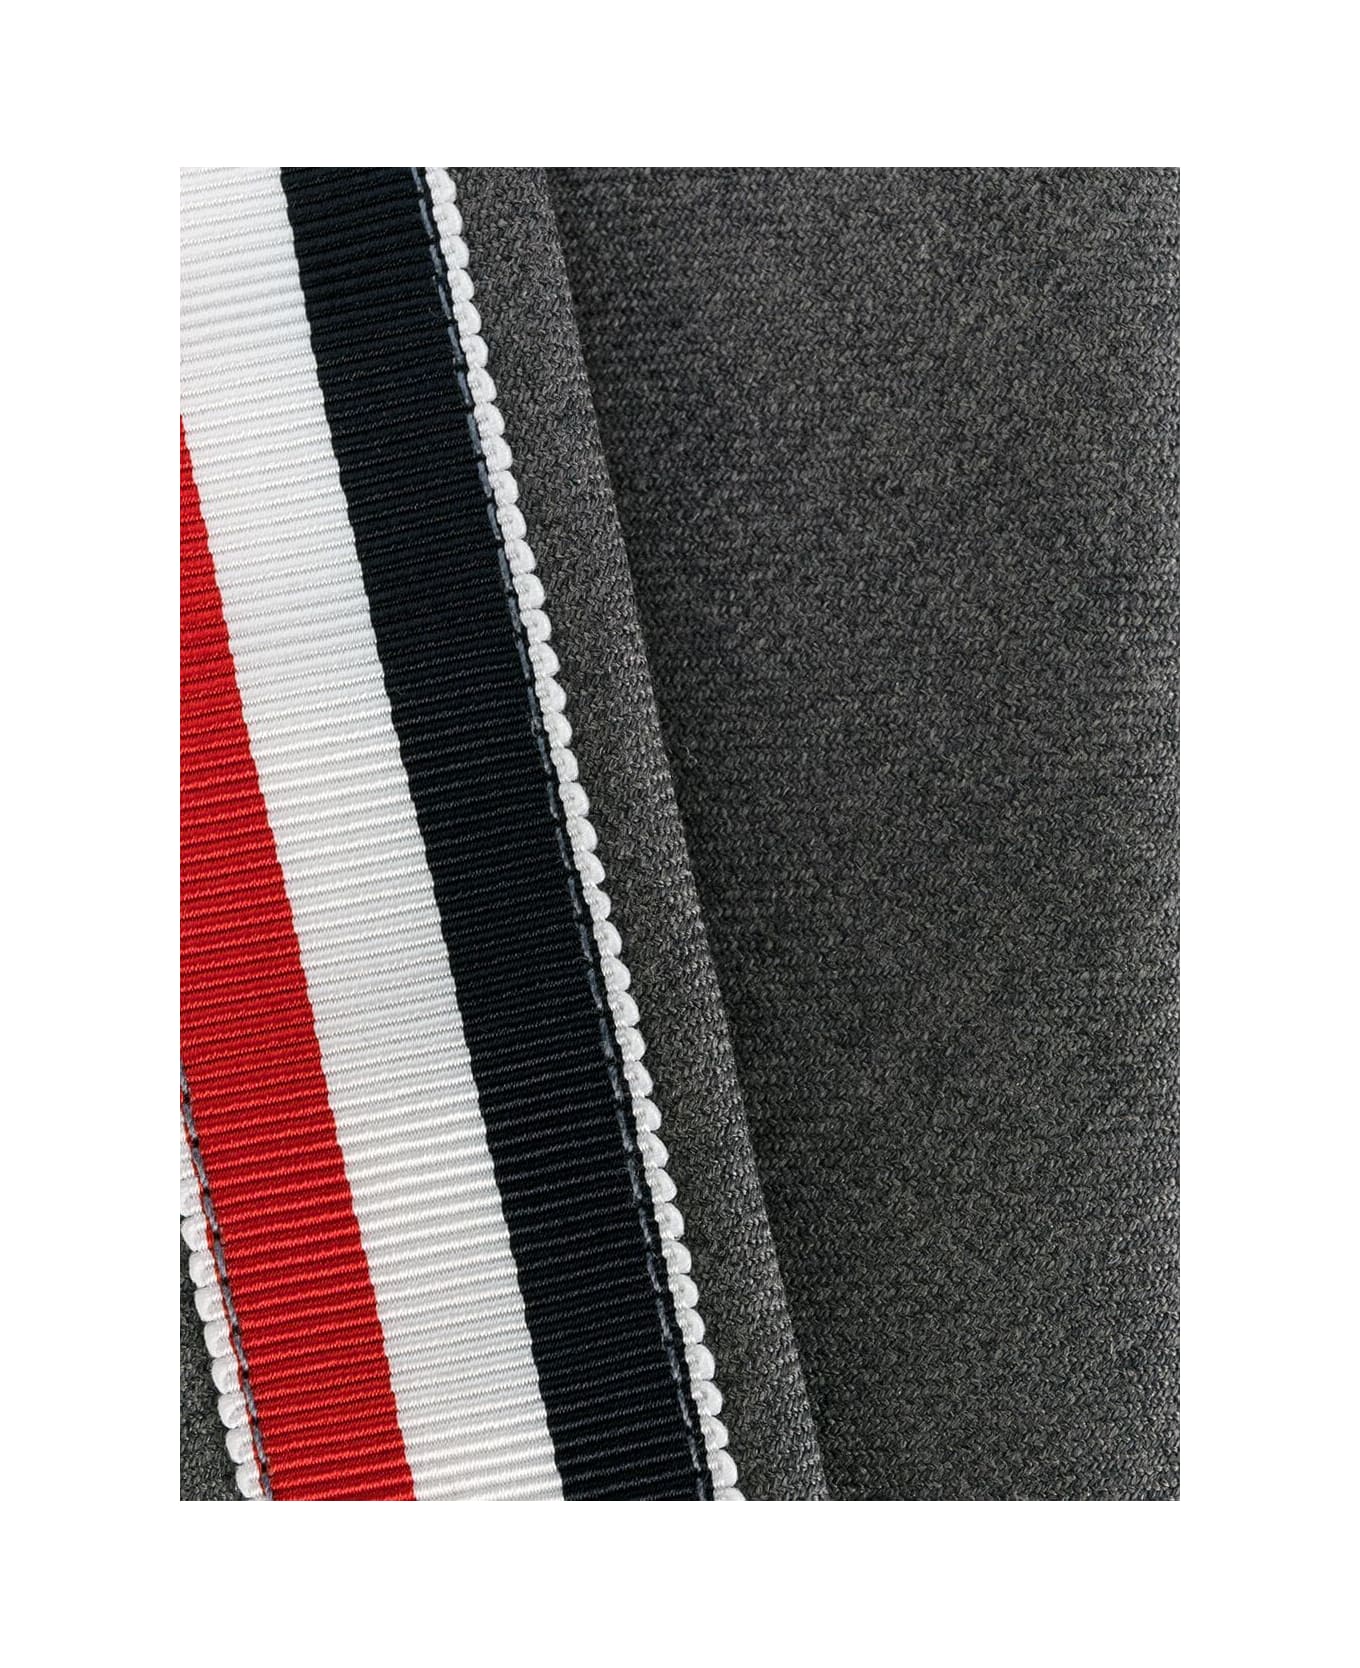 Thom Browne Classic Tie In Super 120 S Twill - Med Grey ネクタイ